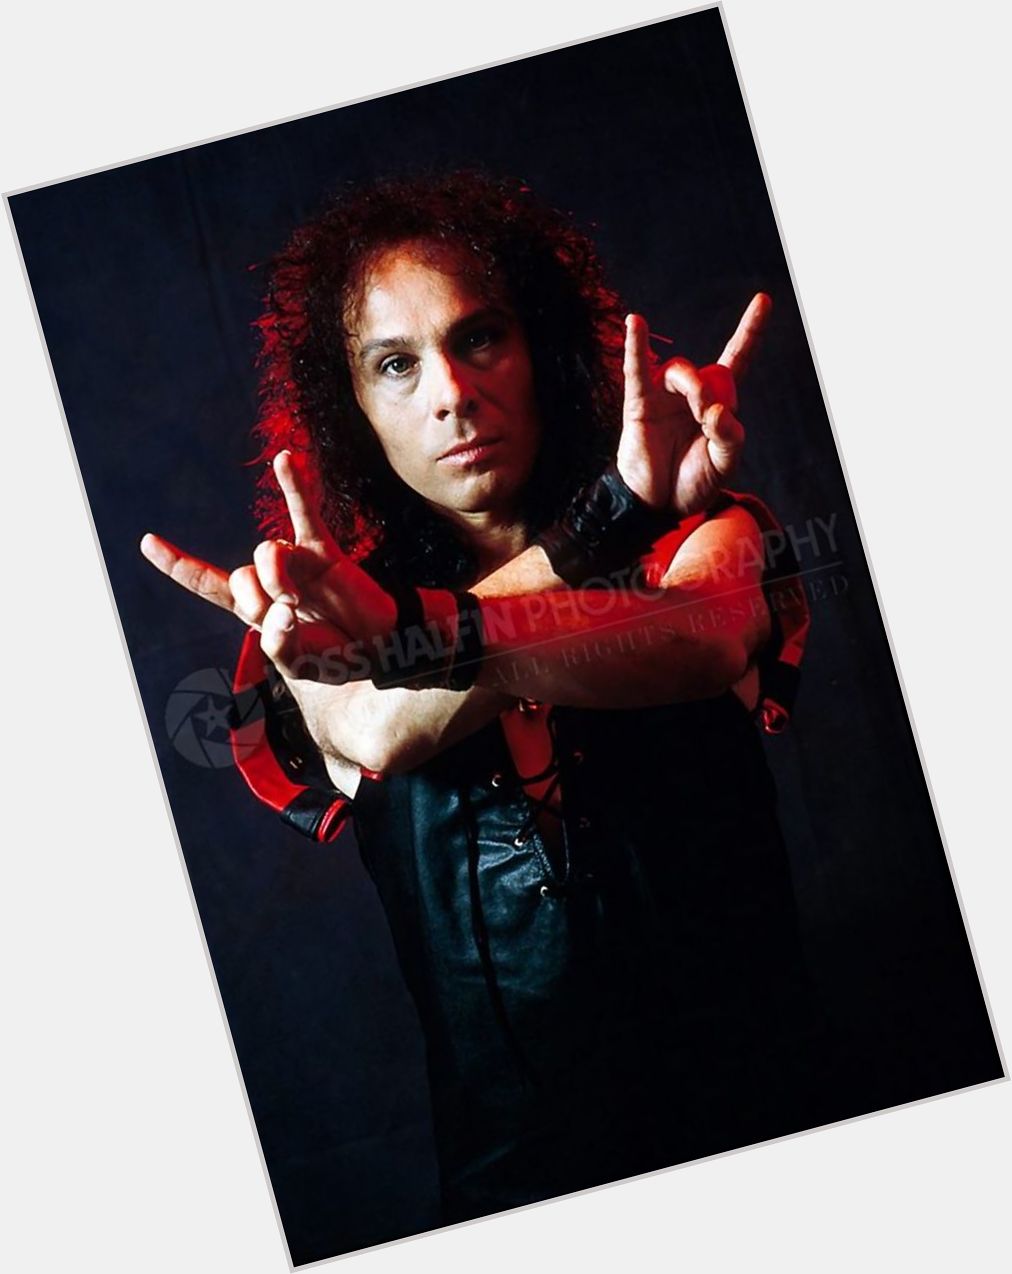 Ronnie James Dio would have been 75 today, July 10th.
Happy Birthday Ronnie! 